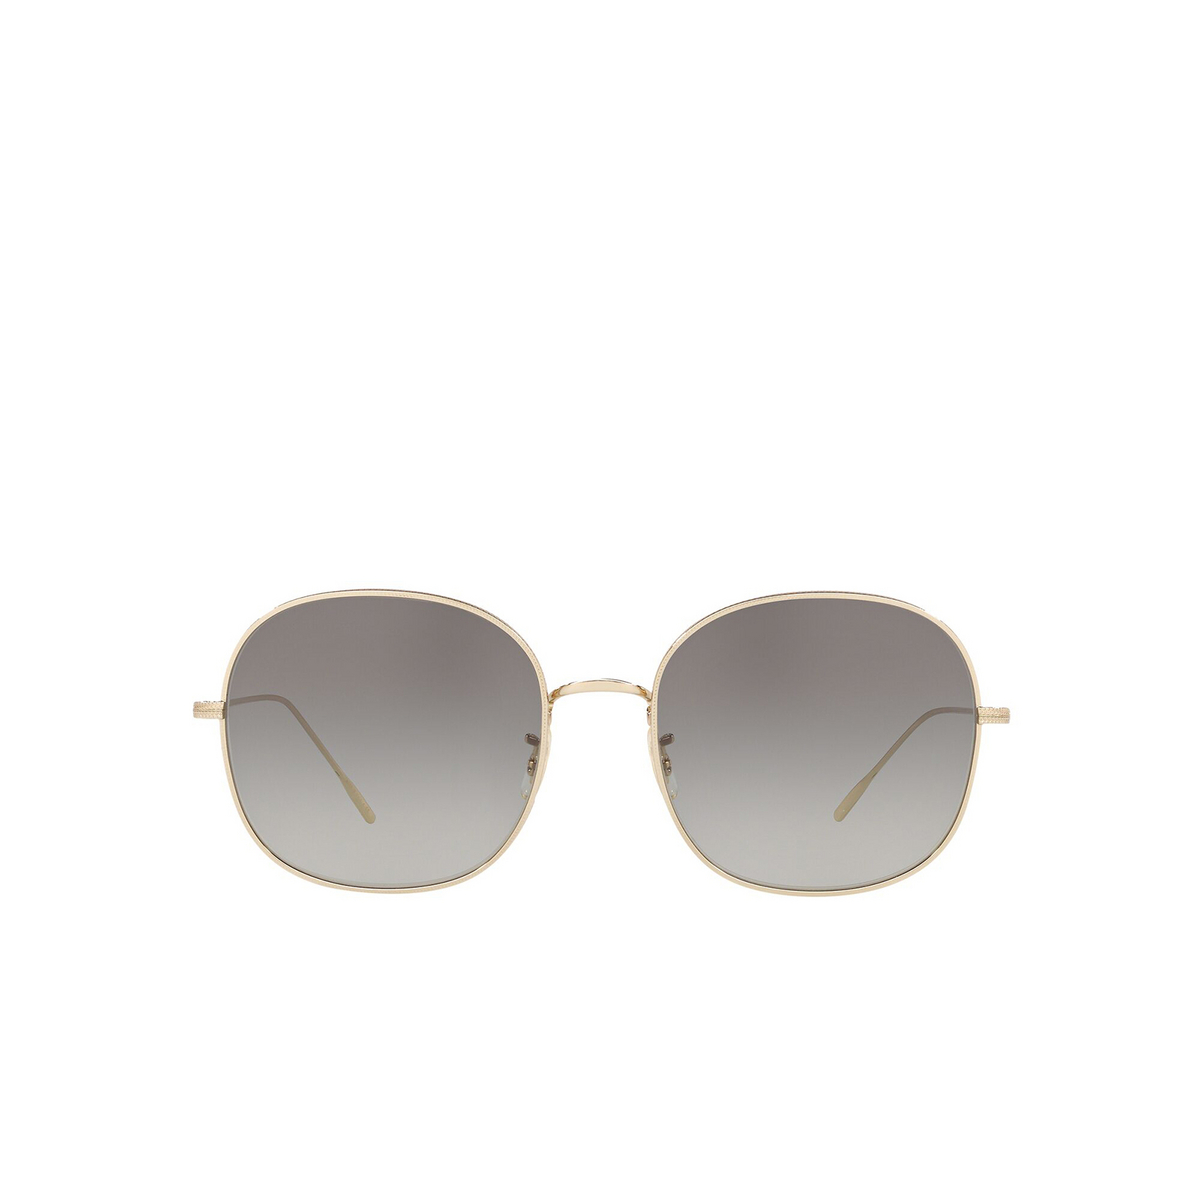 Oliver Peoples® Round Sunglasses: Mehrie OV1255S color Soft Gold 50353C - front view.